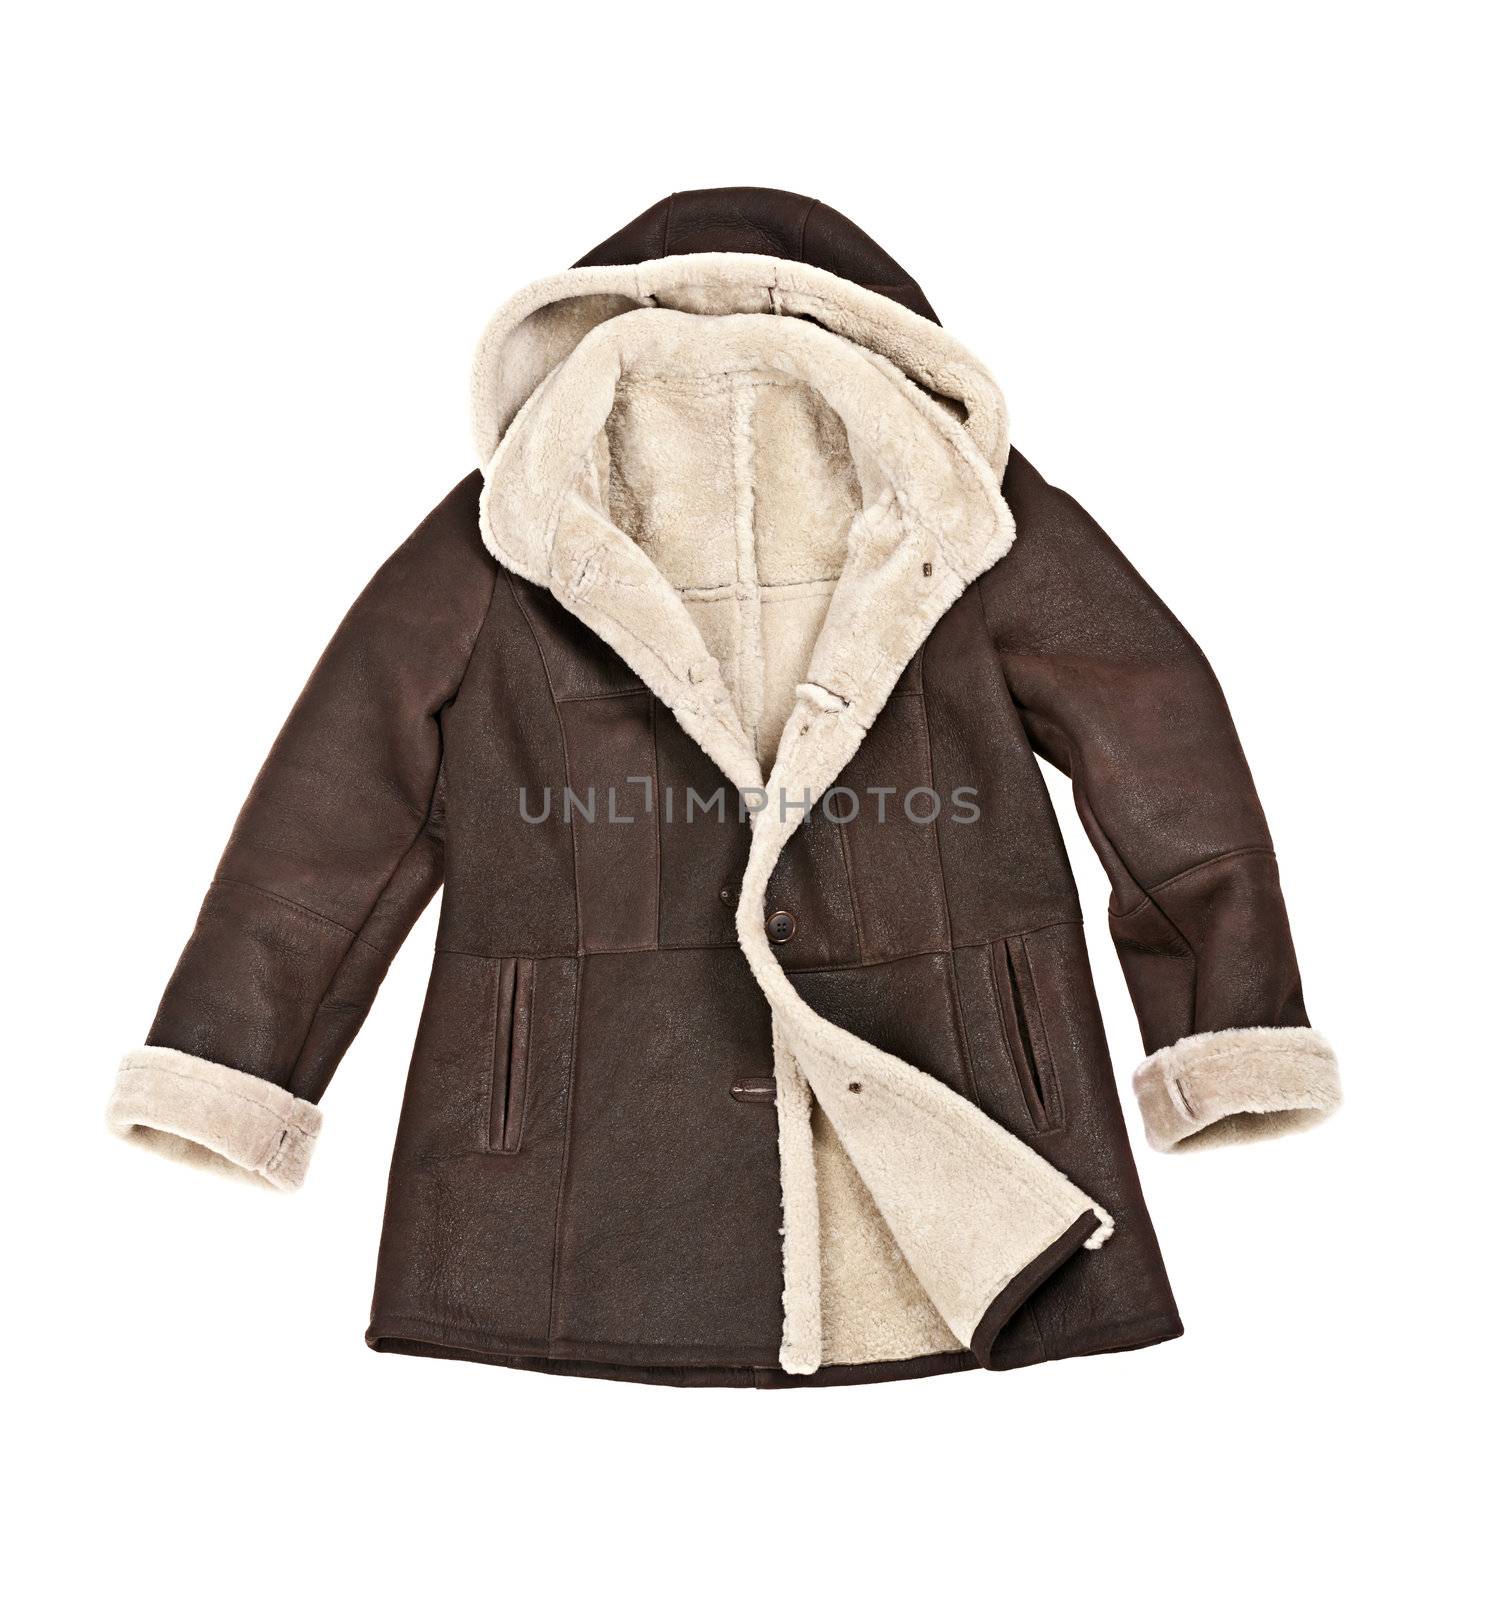 Warm brown shearling winter coat isolated on white